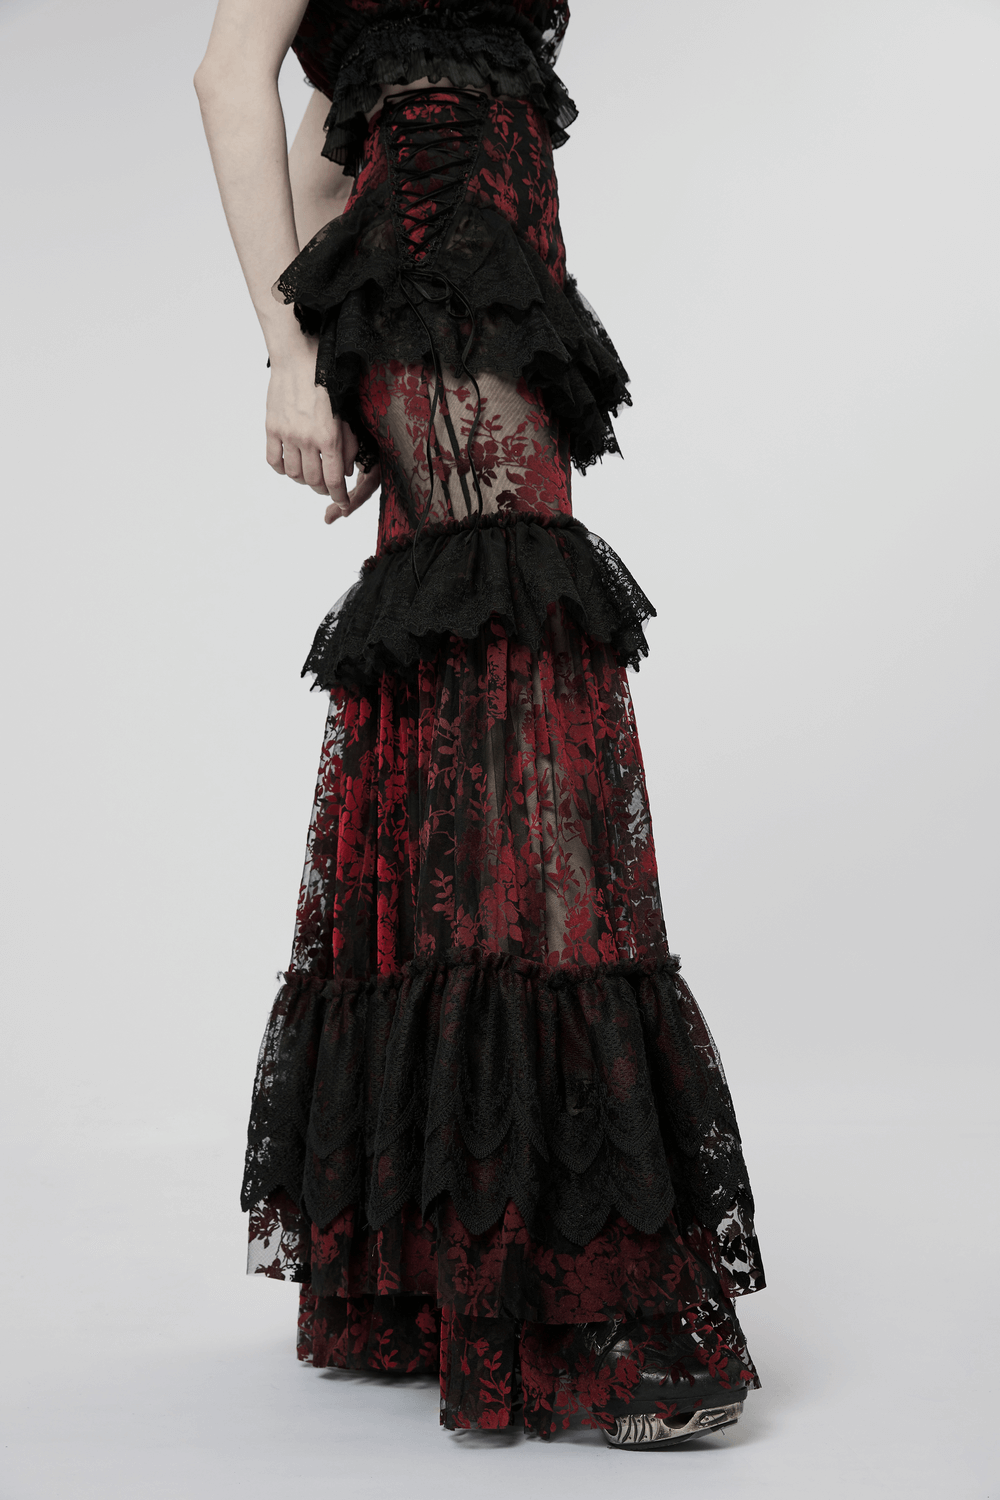 Floral Gothic Layered Lace Fishtail Skirt for Women - HARD'N'HEAVY